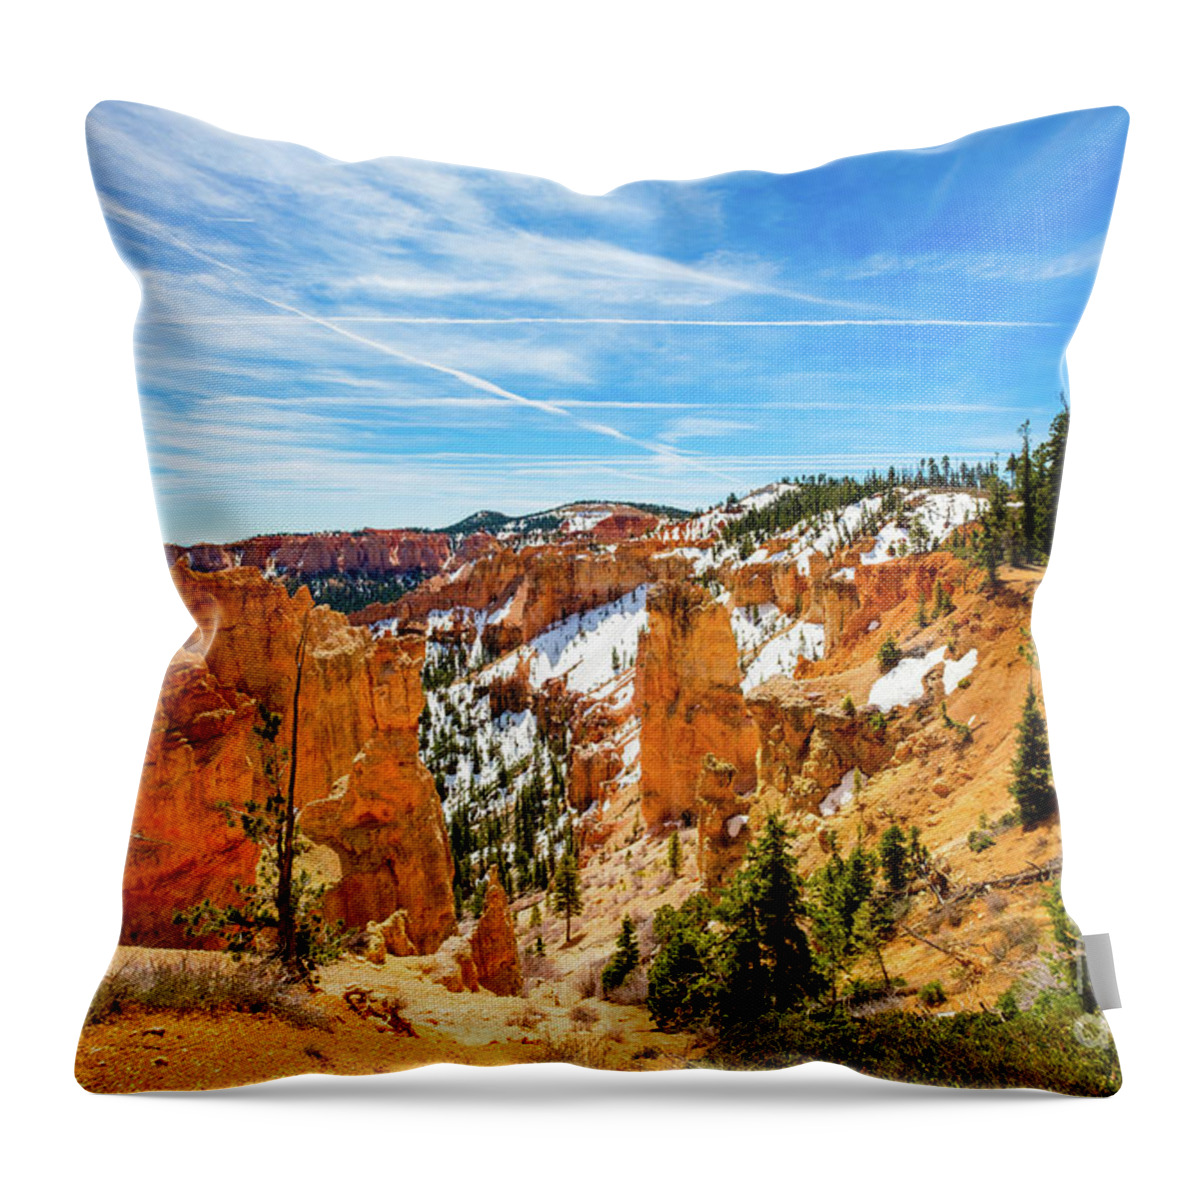 Black Birch Canyon Throw Pillow featuring the photograph Bryce Canyon Utah #6 by Raul Rodriguez